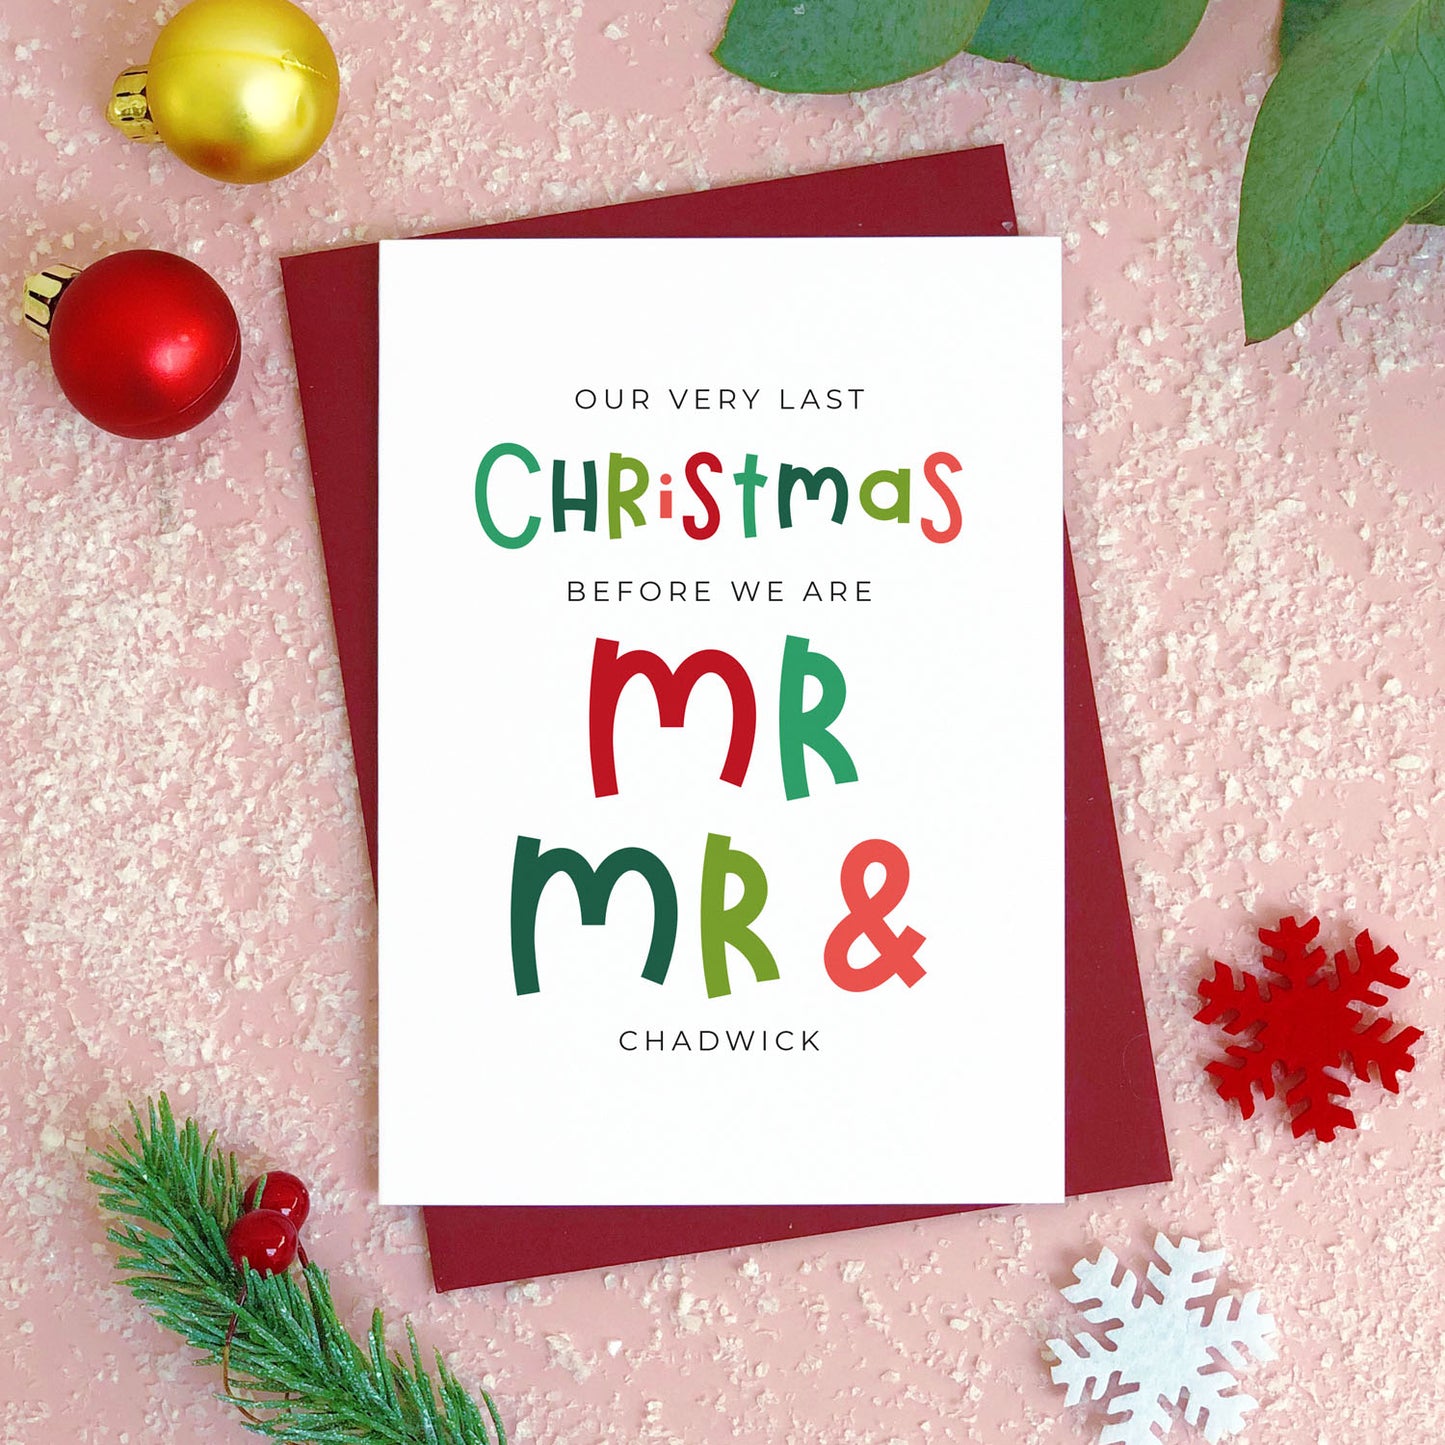 A personalised last Christmas card photographed flat lying on a red wine coloured envelope on a pink surface surrounded by fake snow, baubles and foliage.